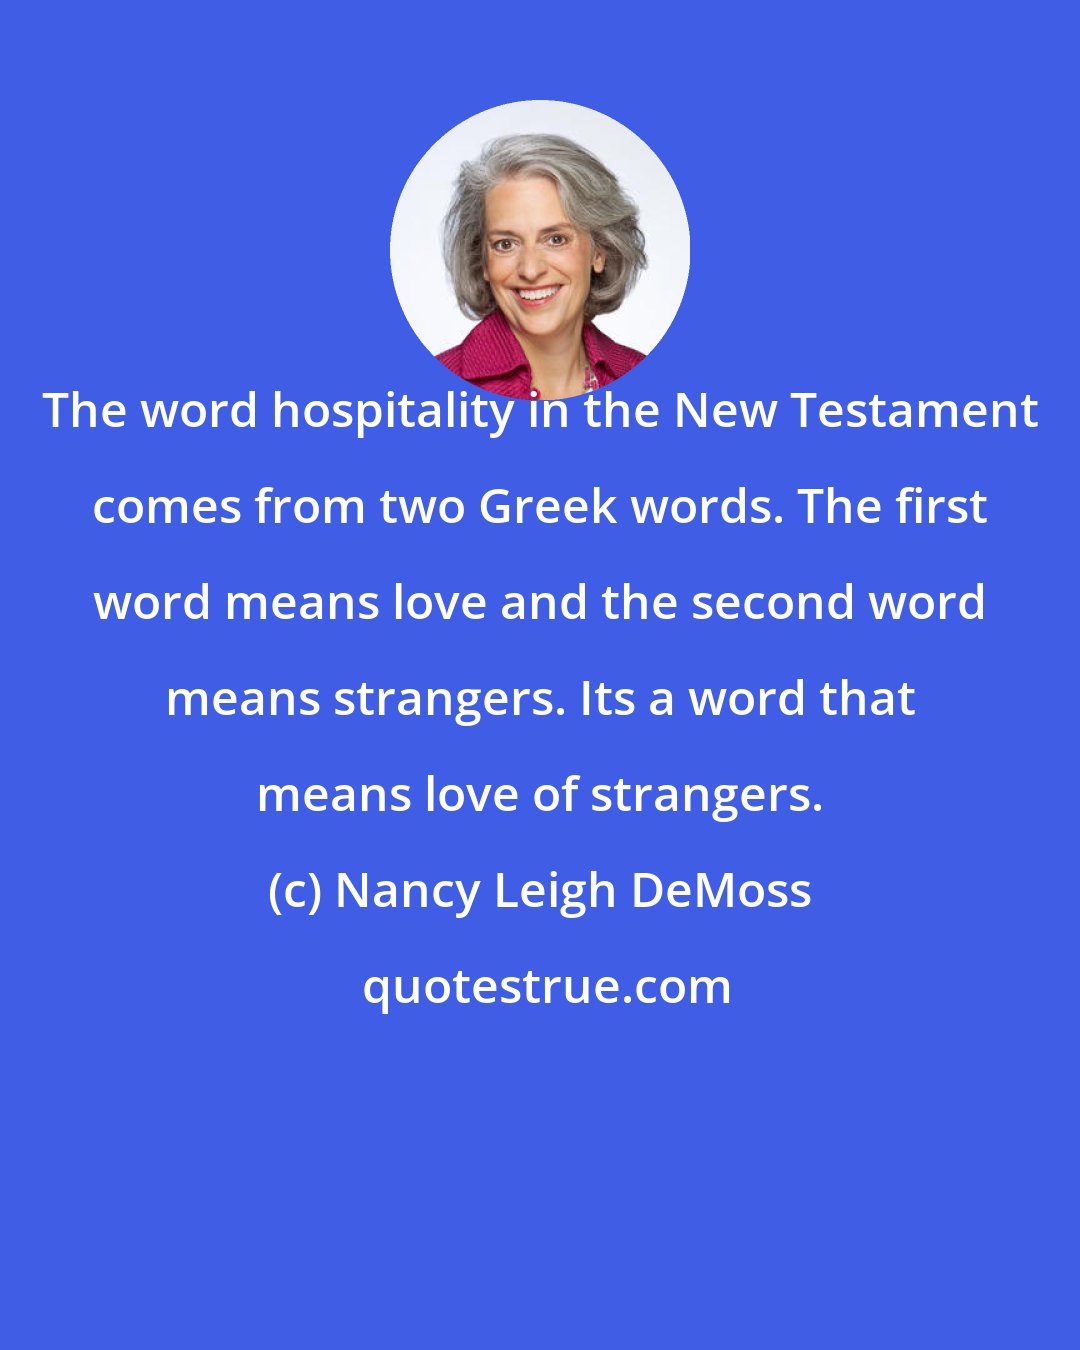 Nancy Leigh DeMoss: The word hospitality in the New Testament comes from two Greek words. The first word means love and the second word means strangers. Its a word that means love of strangers.